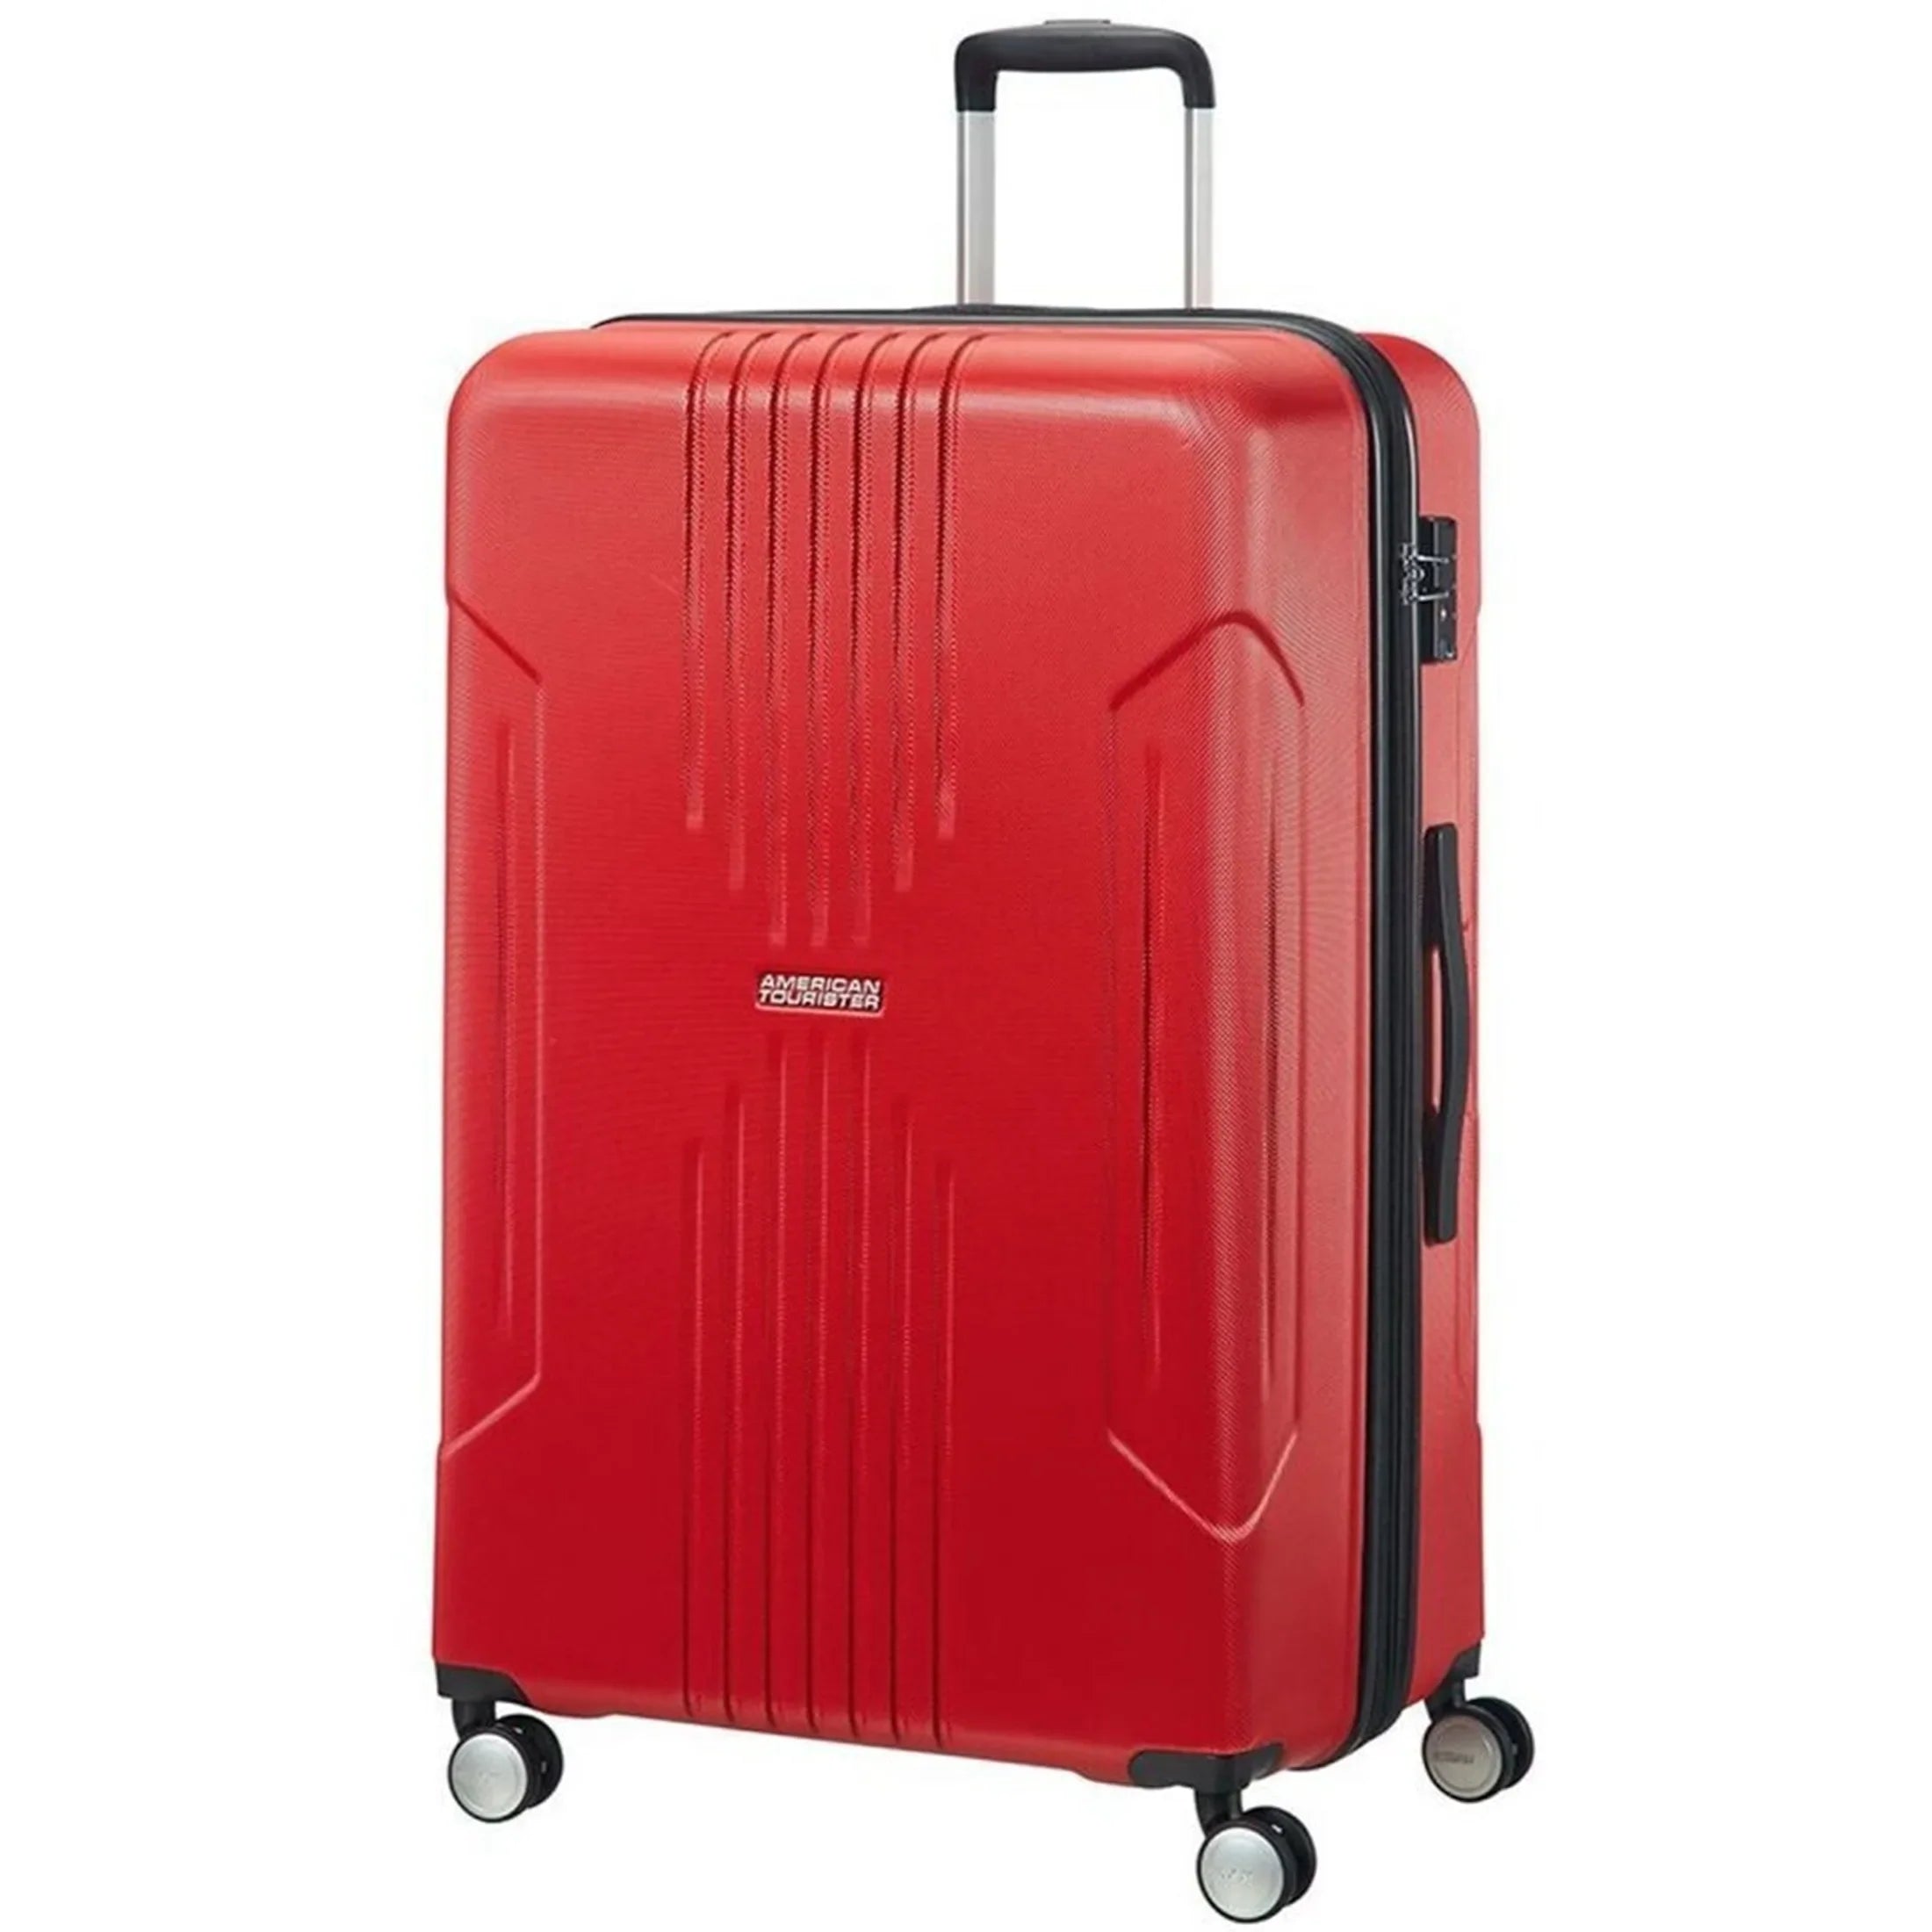 American Tourister Tracklite 4-Rollen Trolley 78 cm - flame red